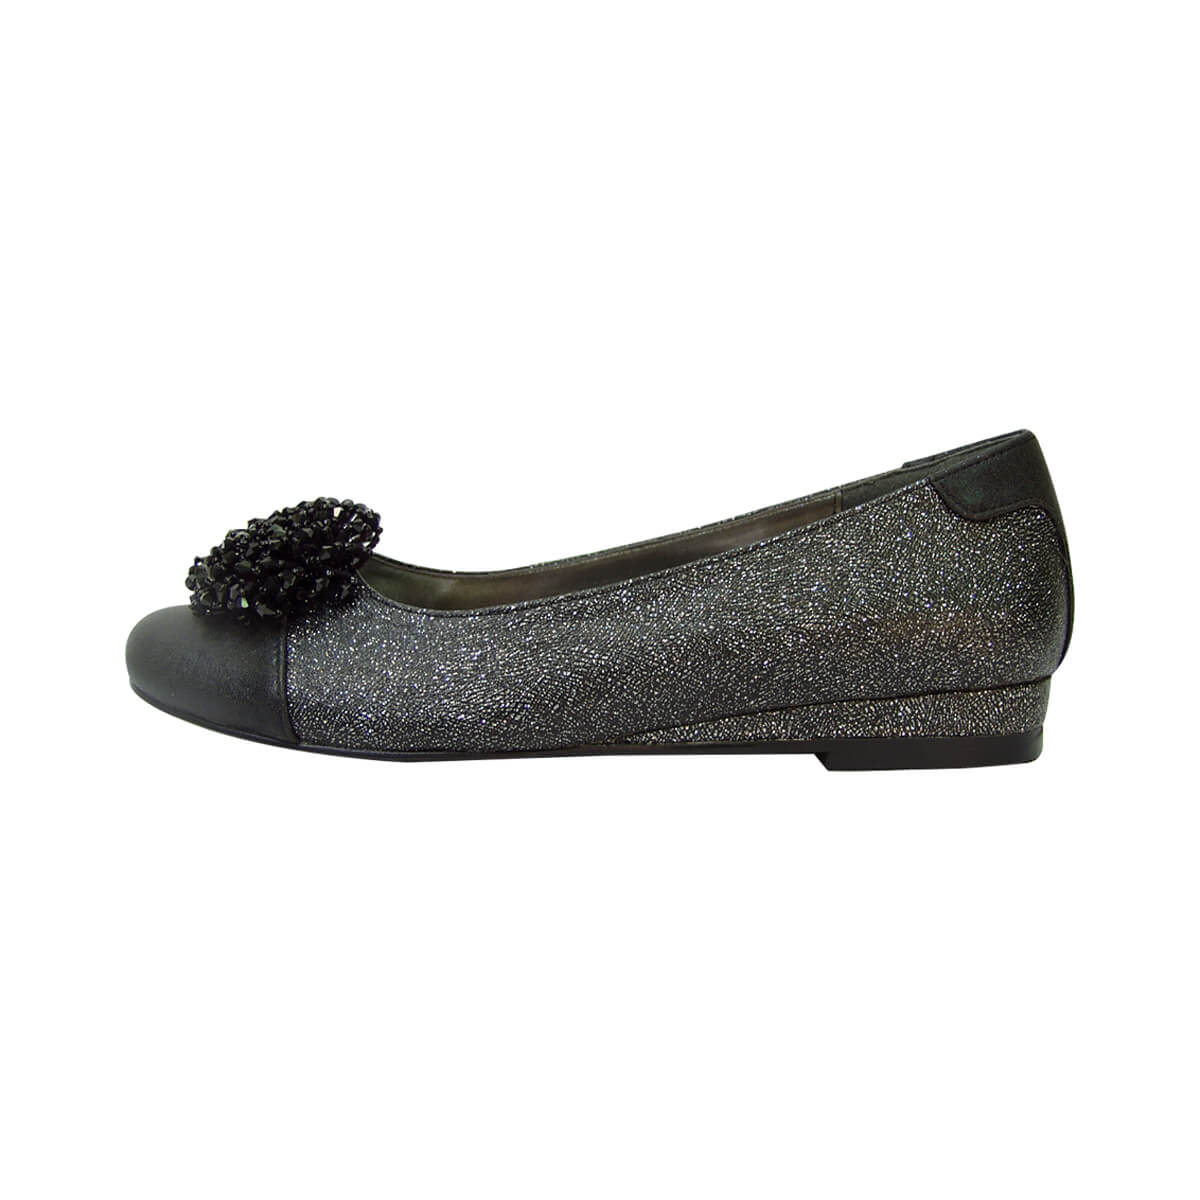 FUZZY Andie Women's Wide Width Dress Casual Round Toe Flats with Bow